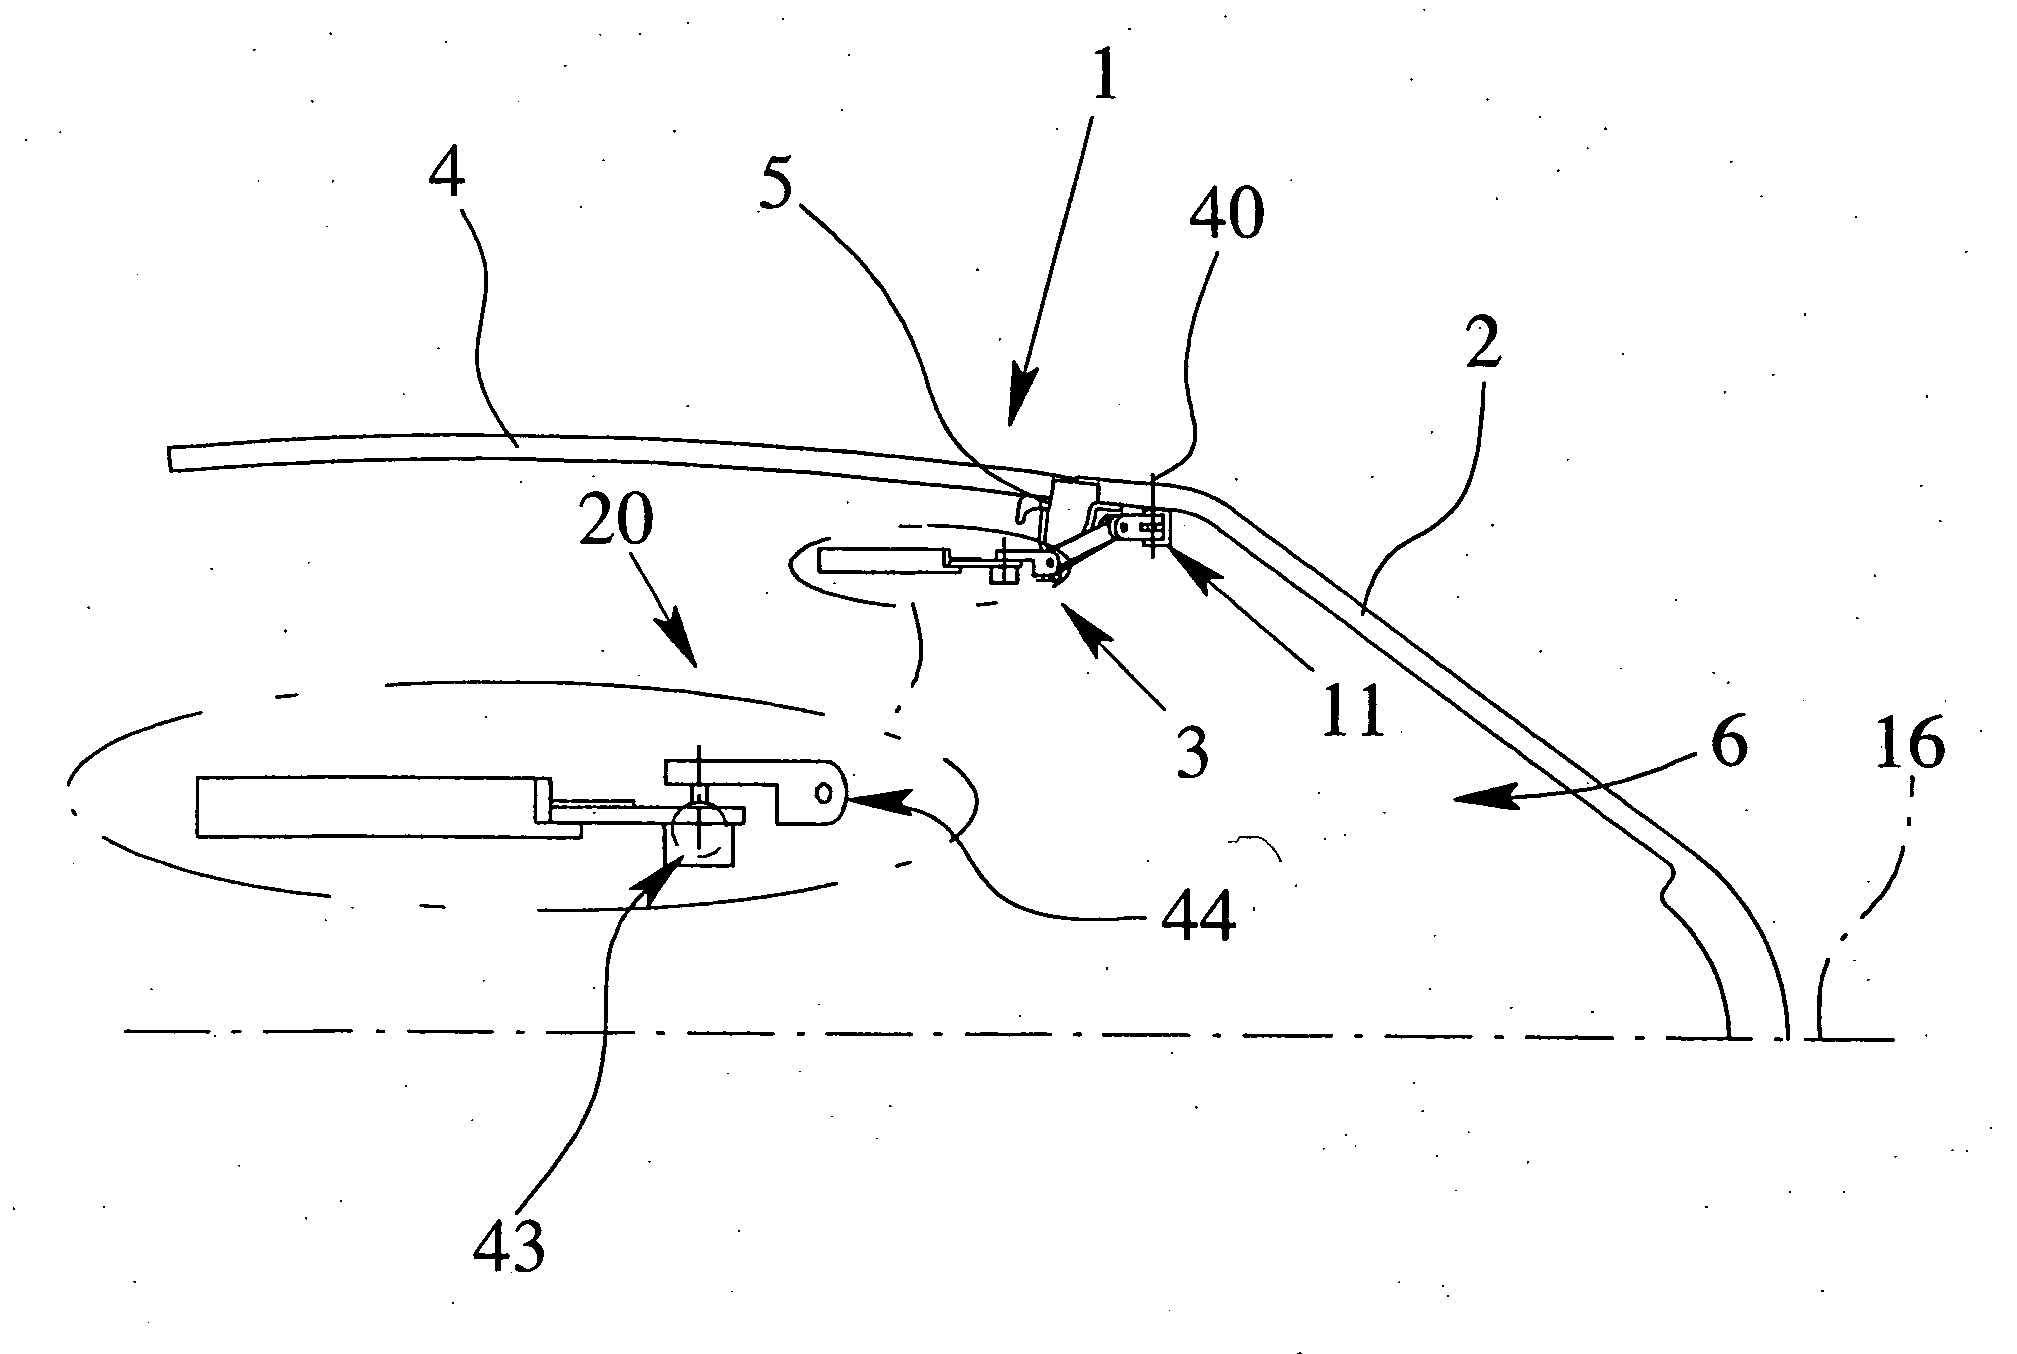 Drive arrangement for activating the hatch of a motor vehicle